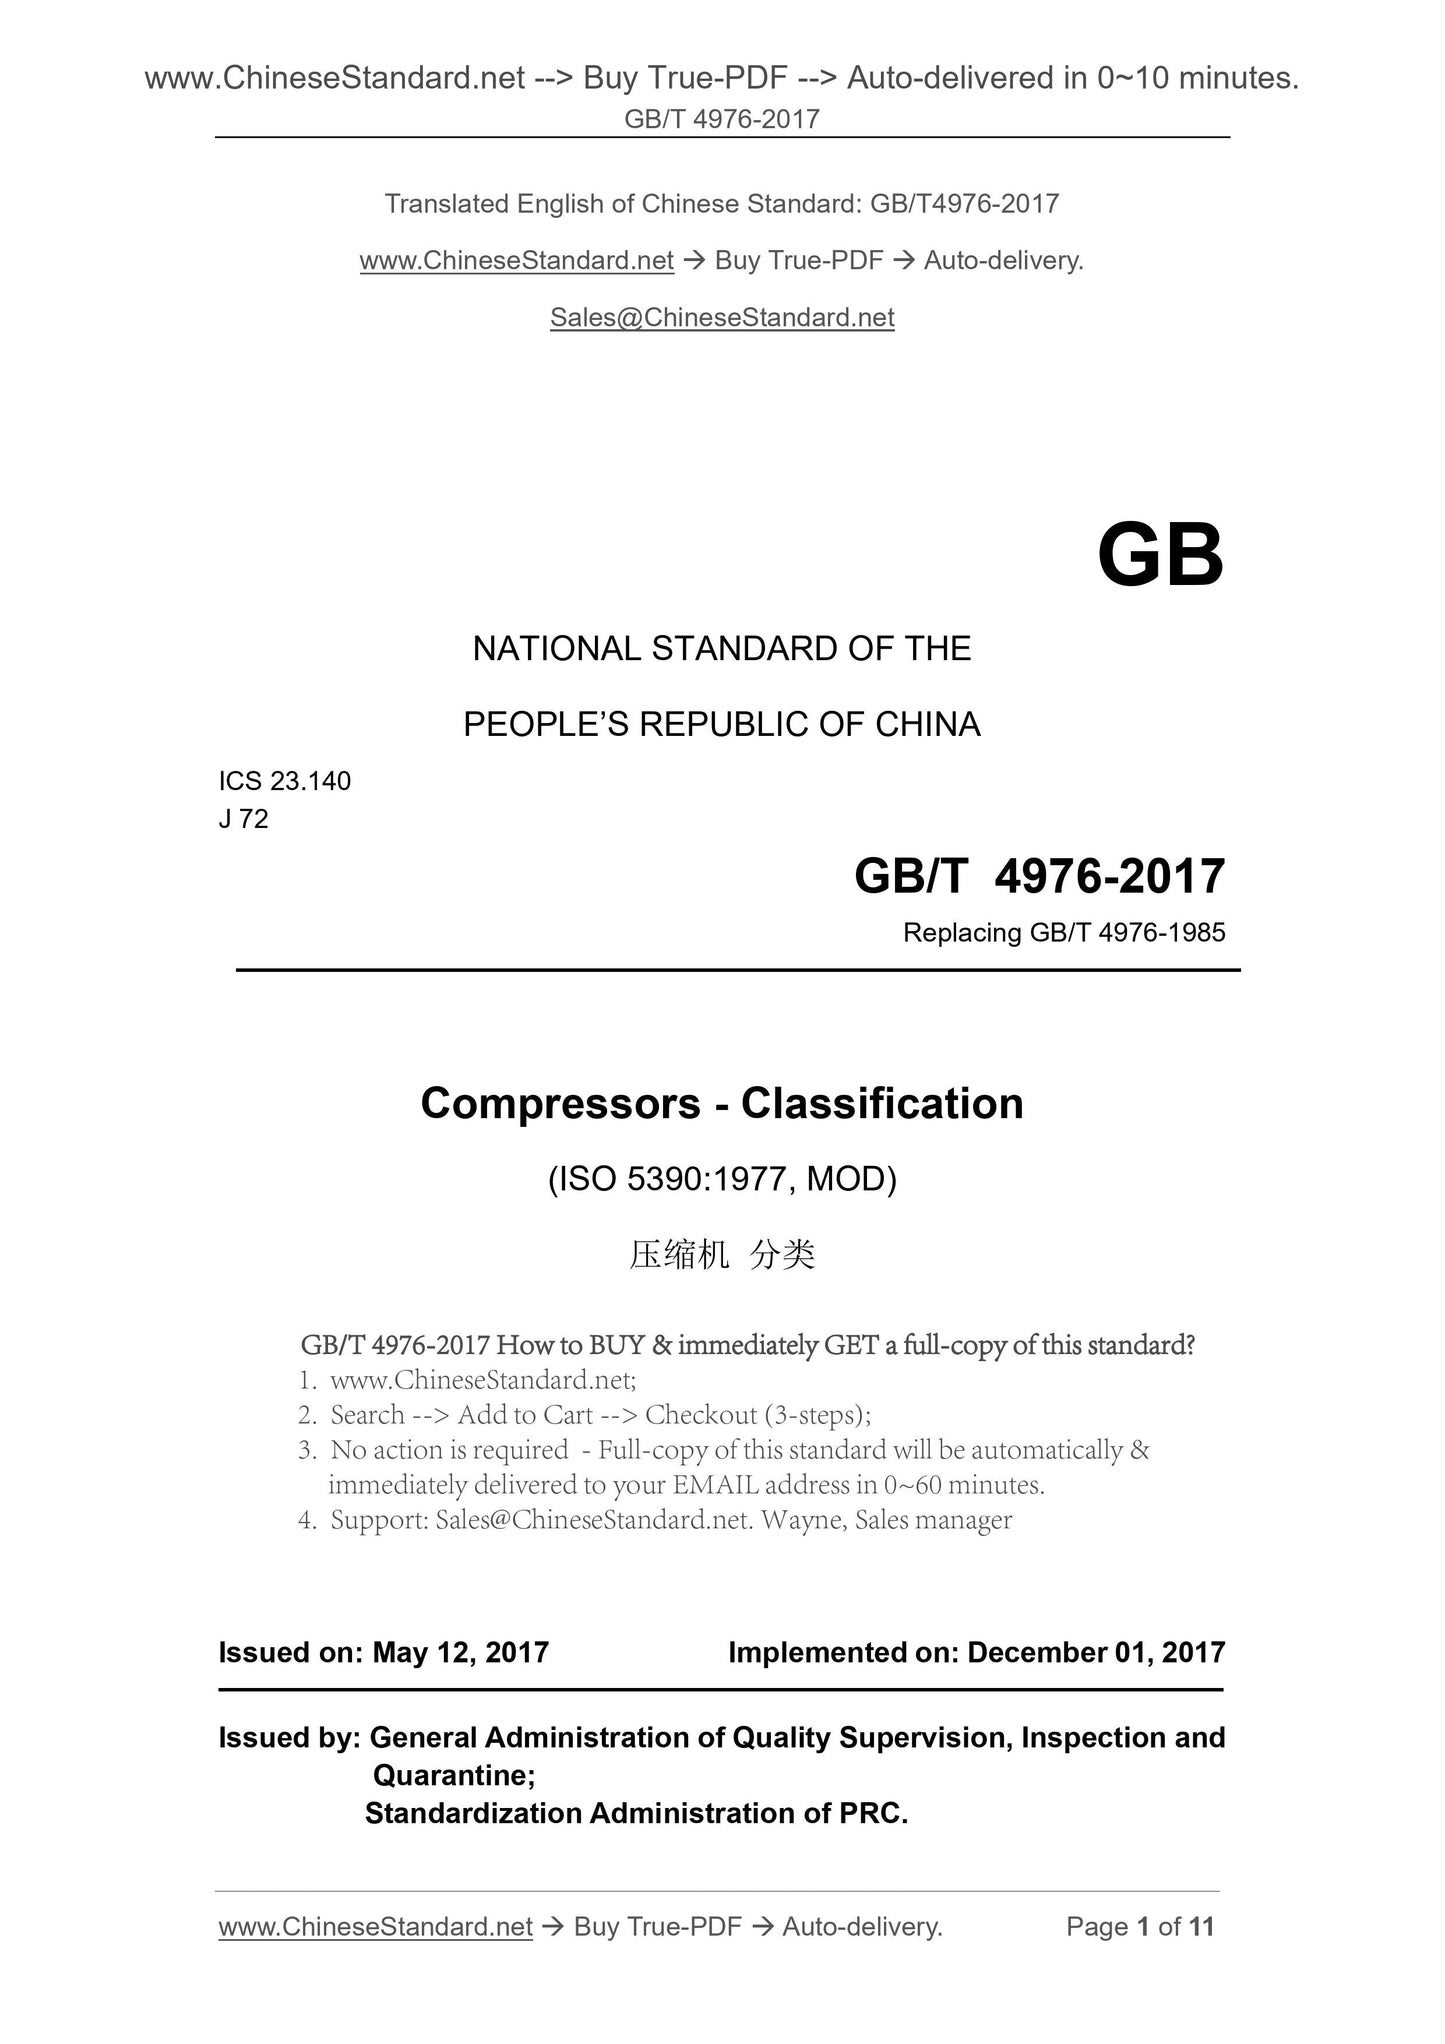 GB/T 4976-2017 Page 1